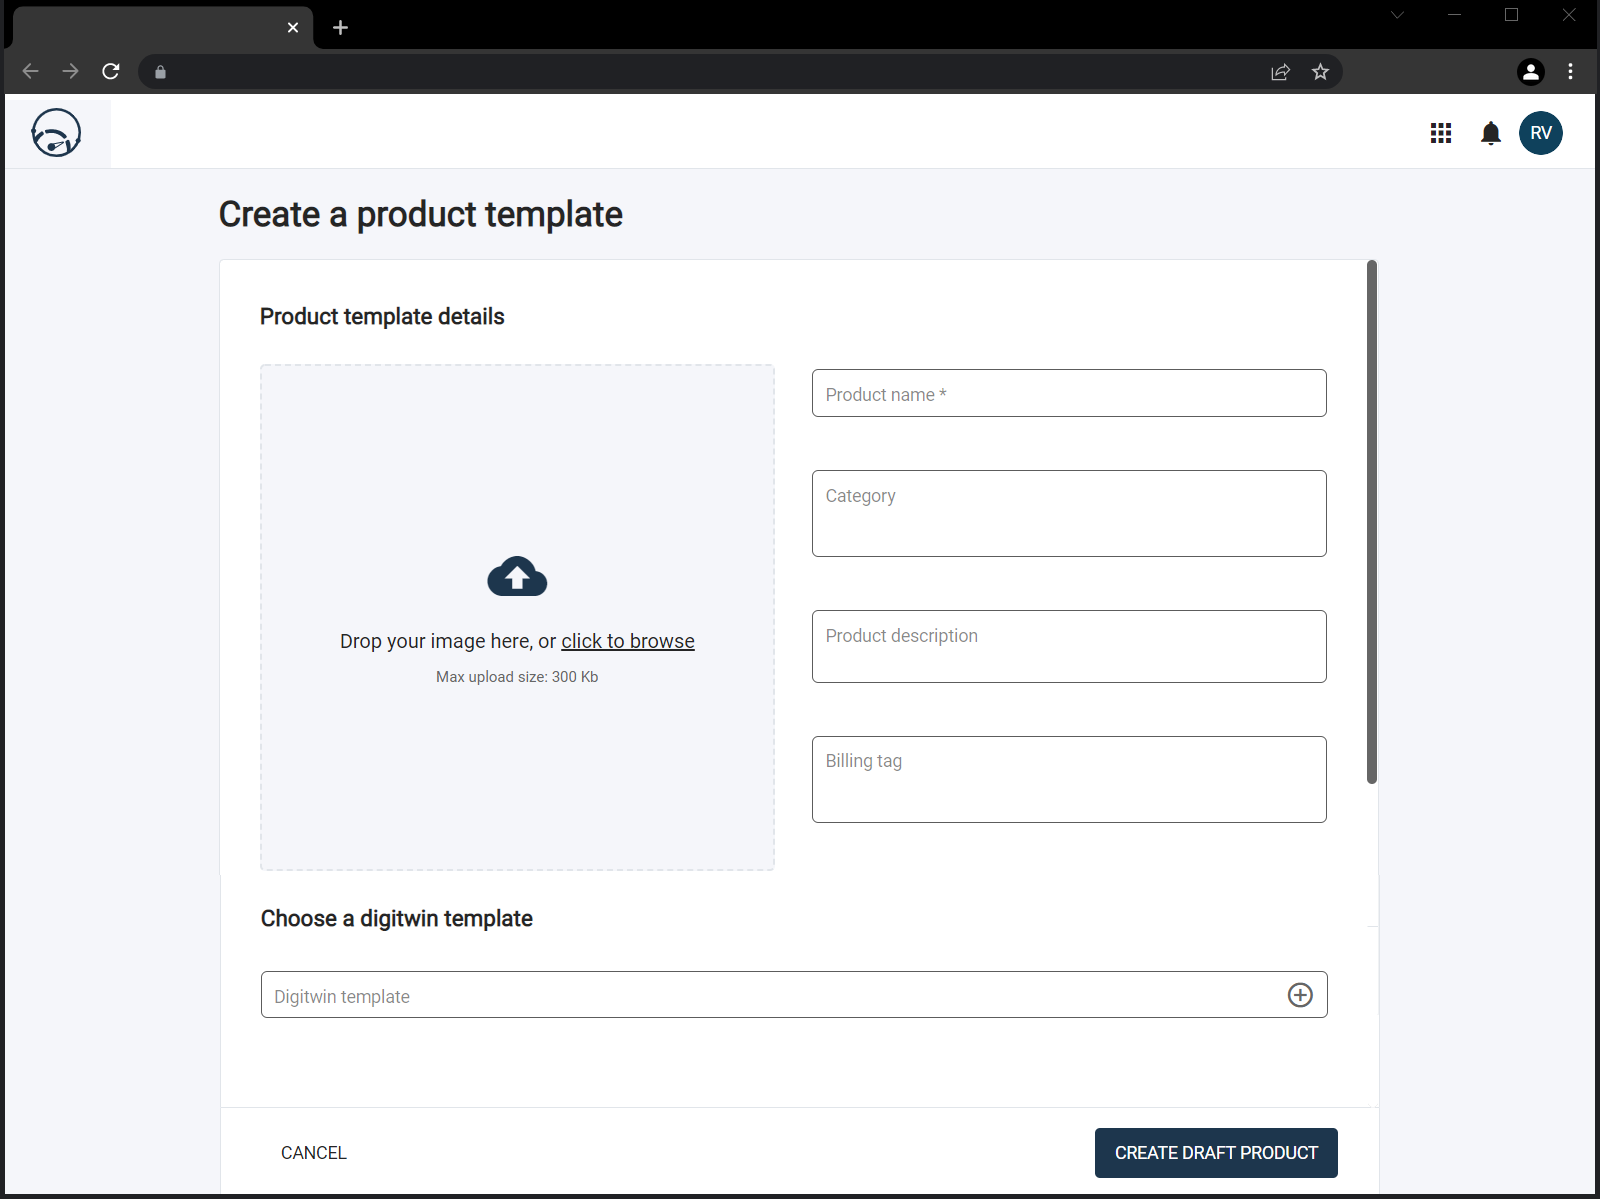 Creating a product template